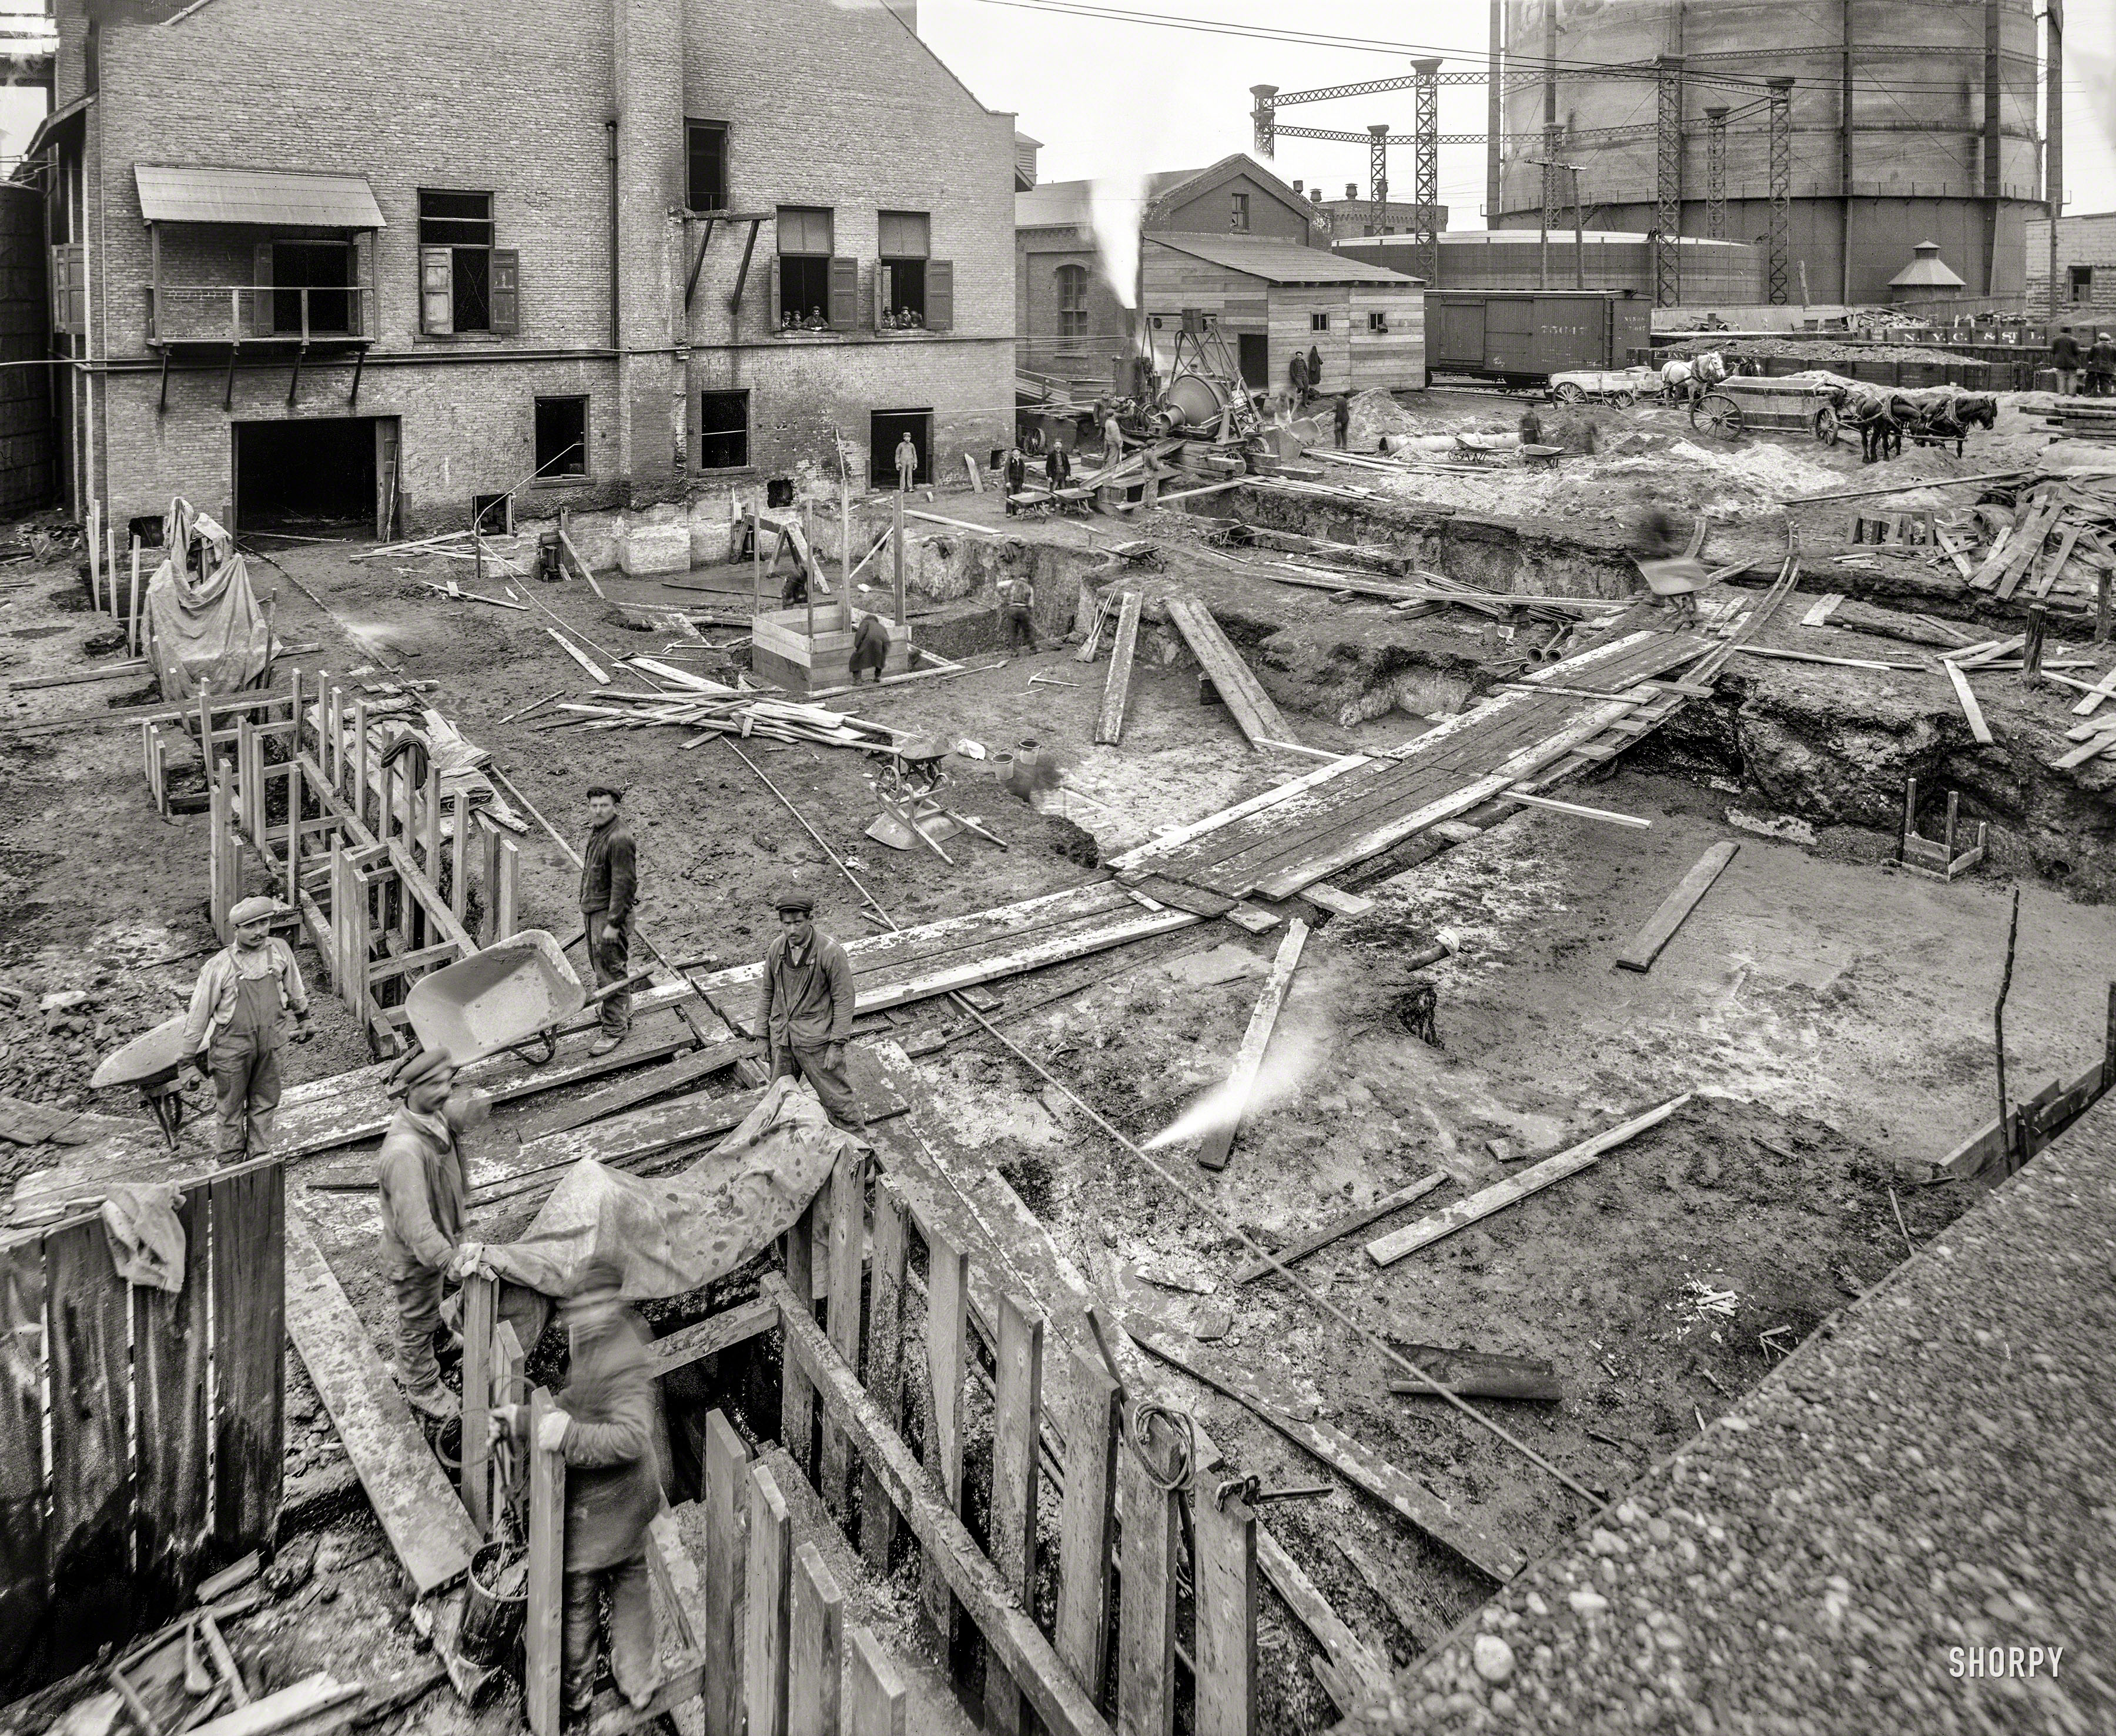 Circa 1912. "Foundation for retort house, construction for Detroit City Gas Company." A scene from the days when most big municipalities had an illuminating-gas plant where coal was heated to make the poisonous product known as "city gas." 8x10 inch glass negative. View full size.